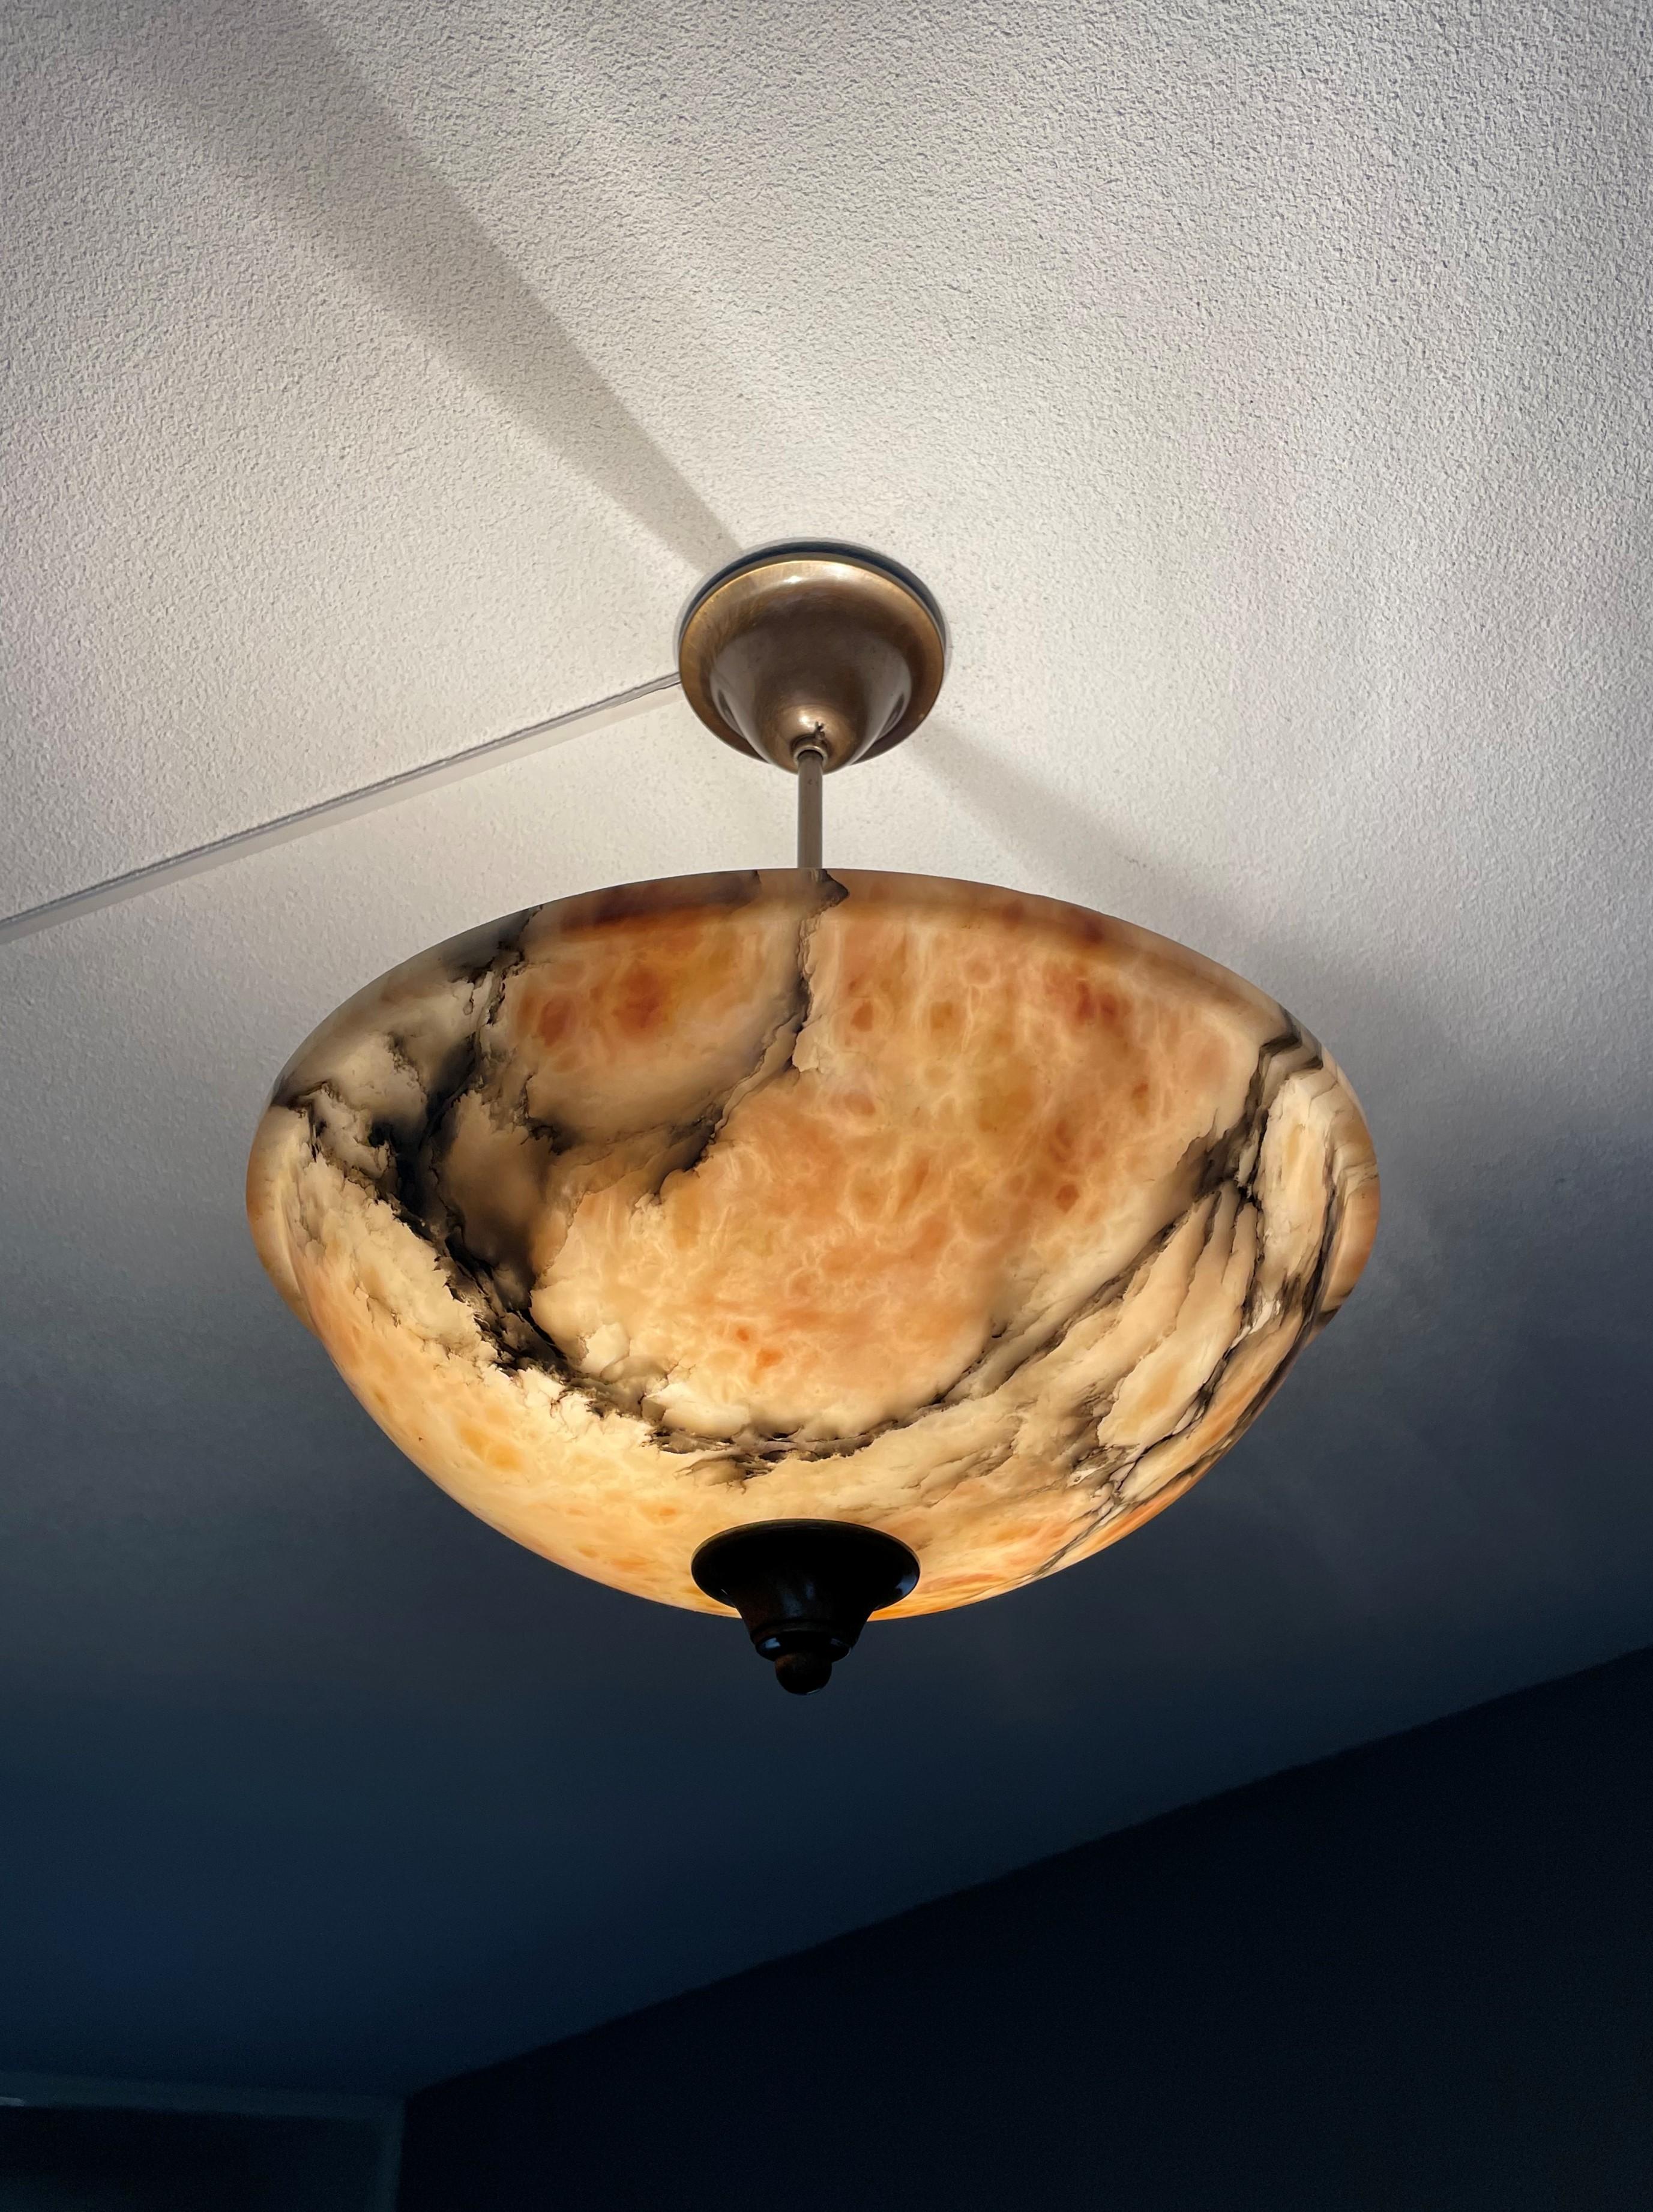 Unique and good size, two-light alabaster ceiling lamp of superb quality and condition.

This light fixture from the heydays of the European Art Deco era will light up both your days and evenings. Its timeless shade is all hand carved out of one